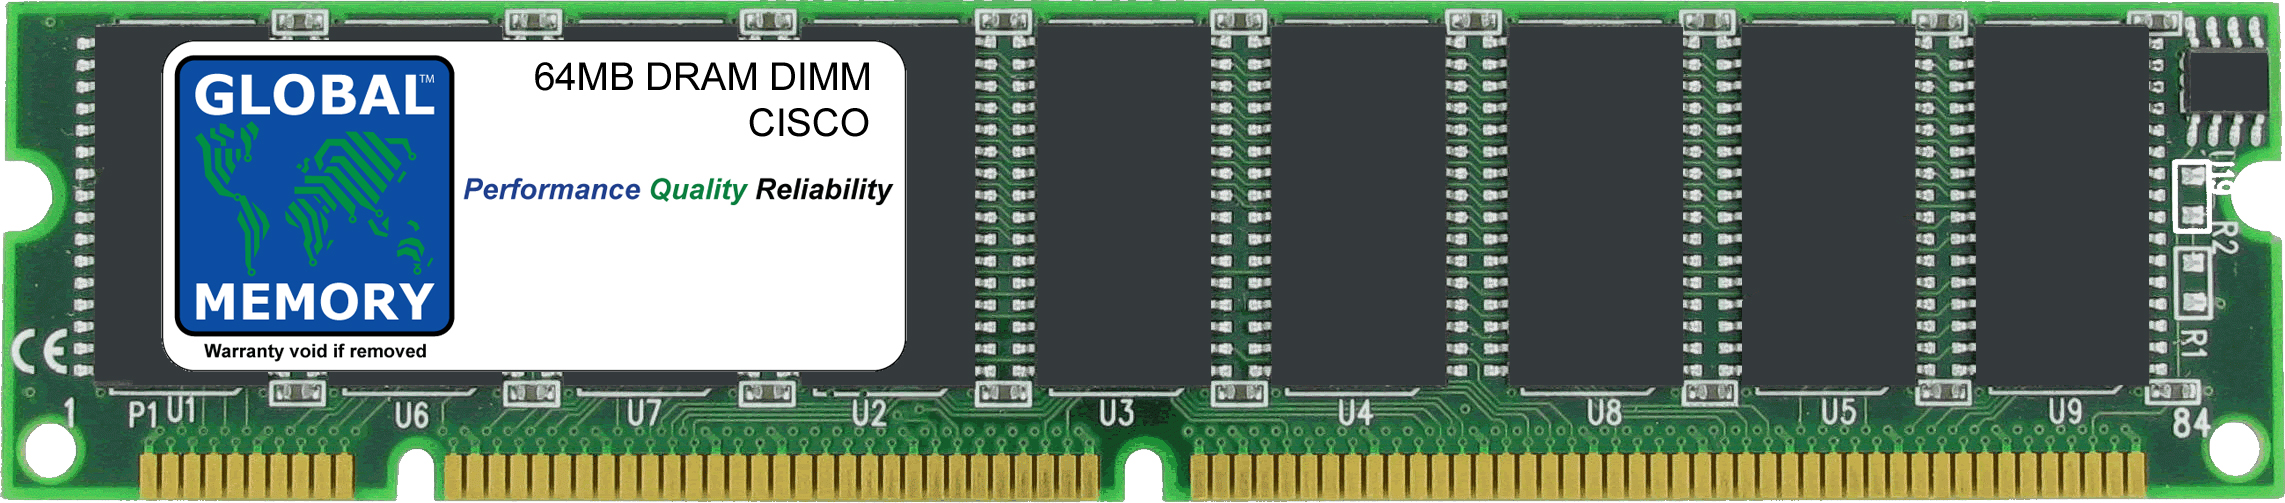 64MB DRAM DIMM MEMORY RAM FOR CISCO 12000 SERIES ROUTERS GRP LINE CARD (MEM-GRP/LC-64) - Click Image to Close